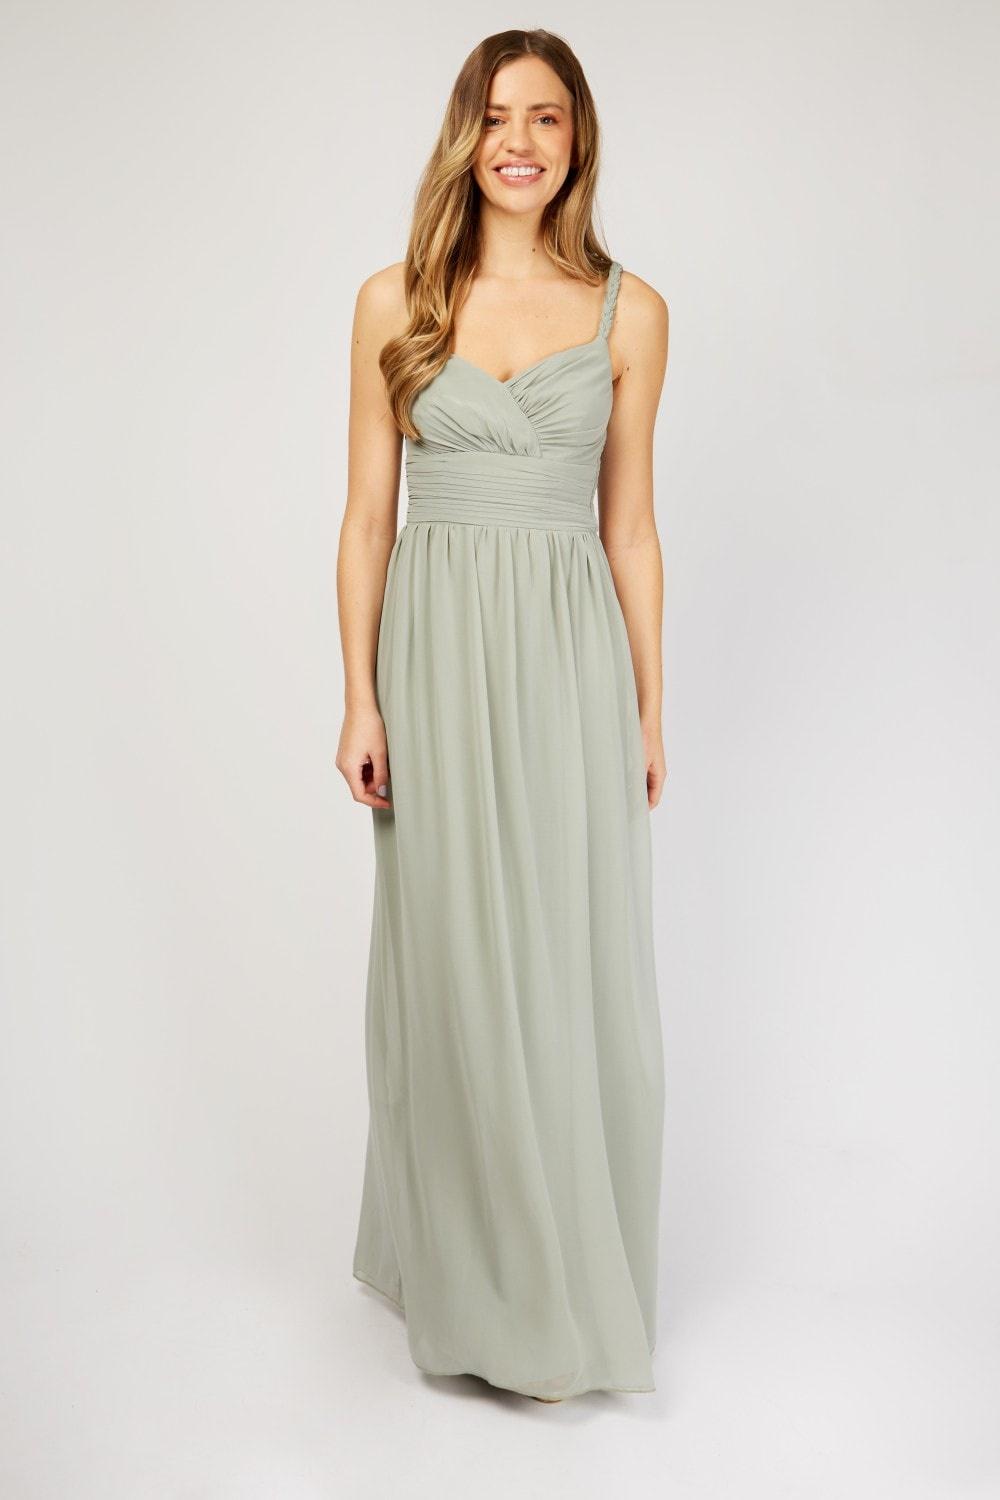 38 Gorgeous Green Bridesmaid Dresses 2022 - hitched.co.uk - hitched.co.uk